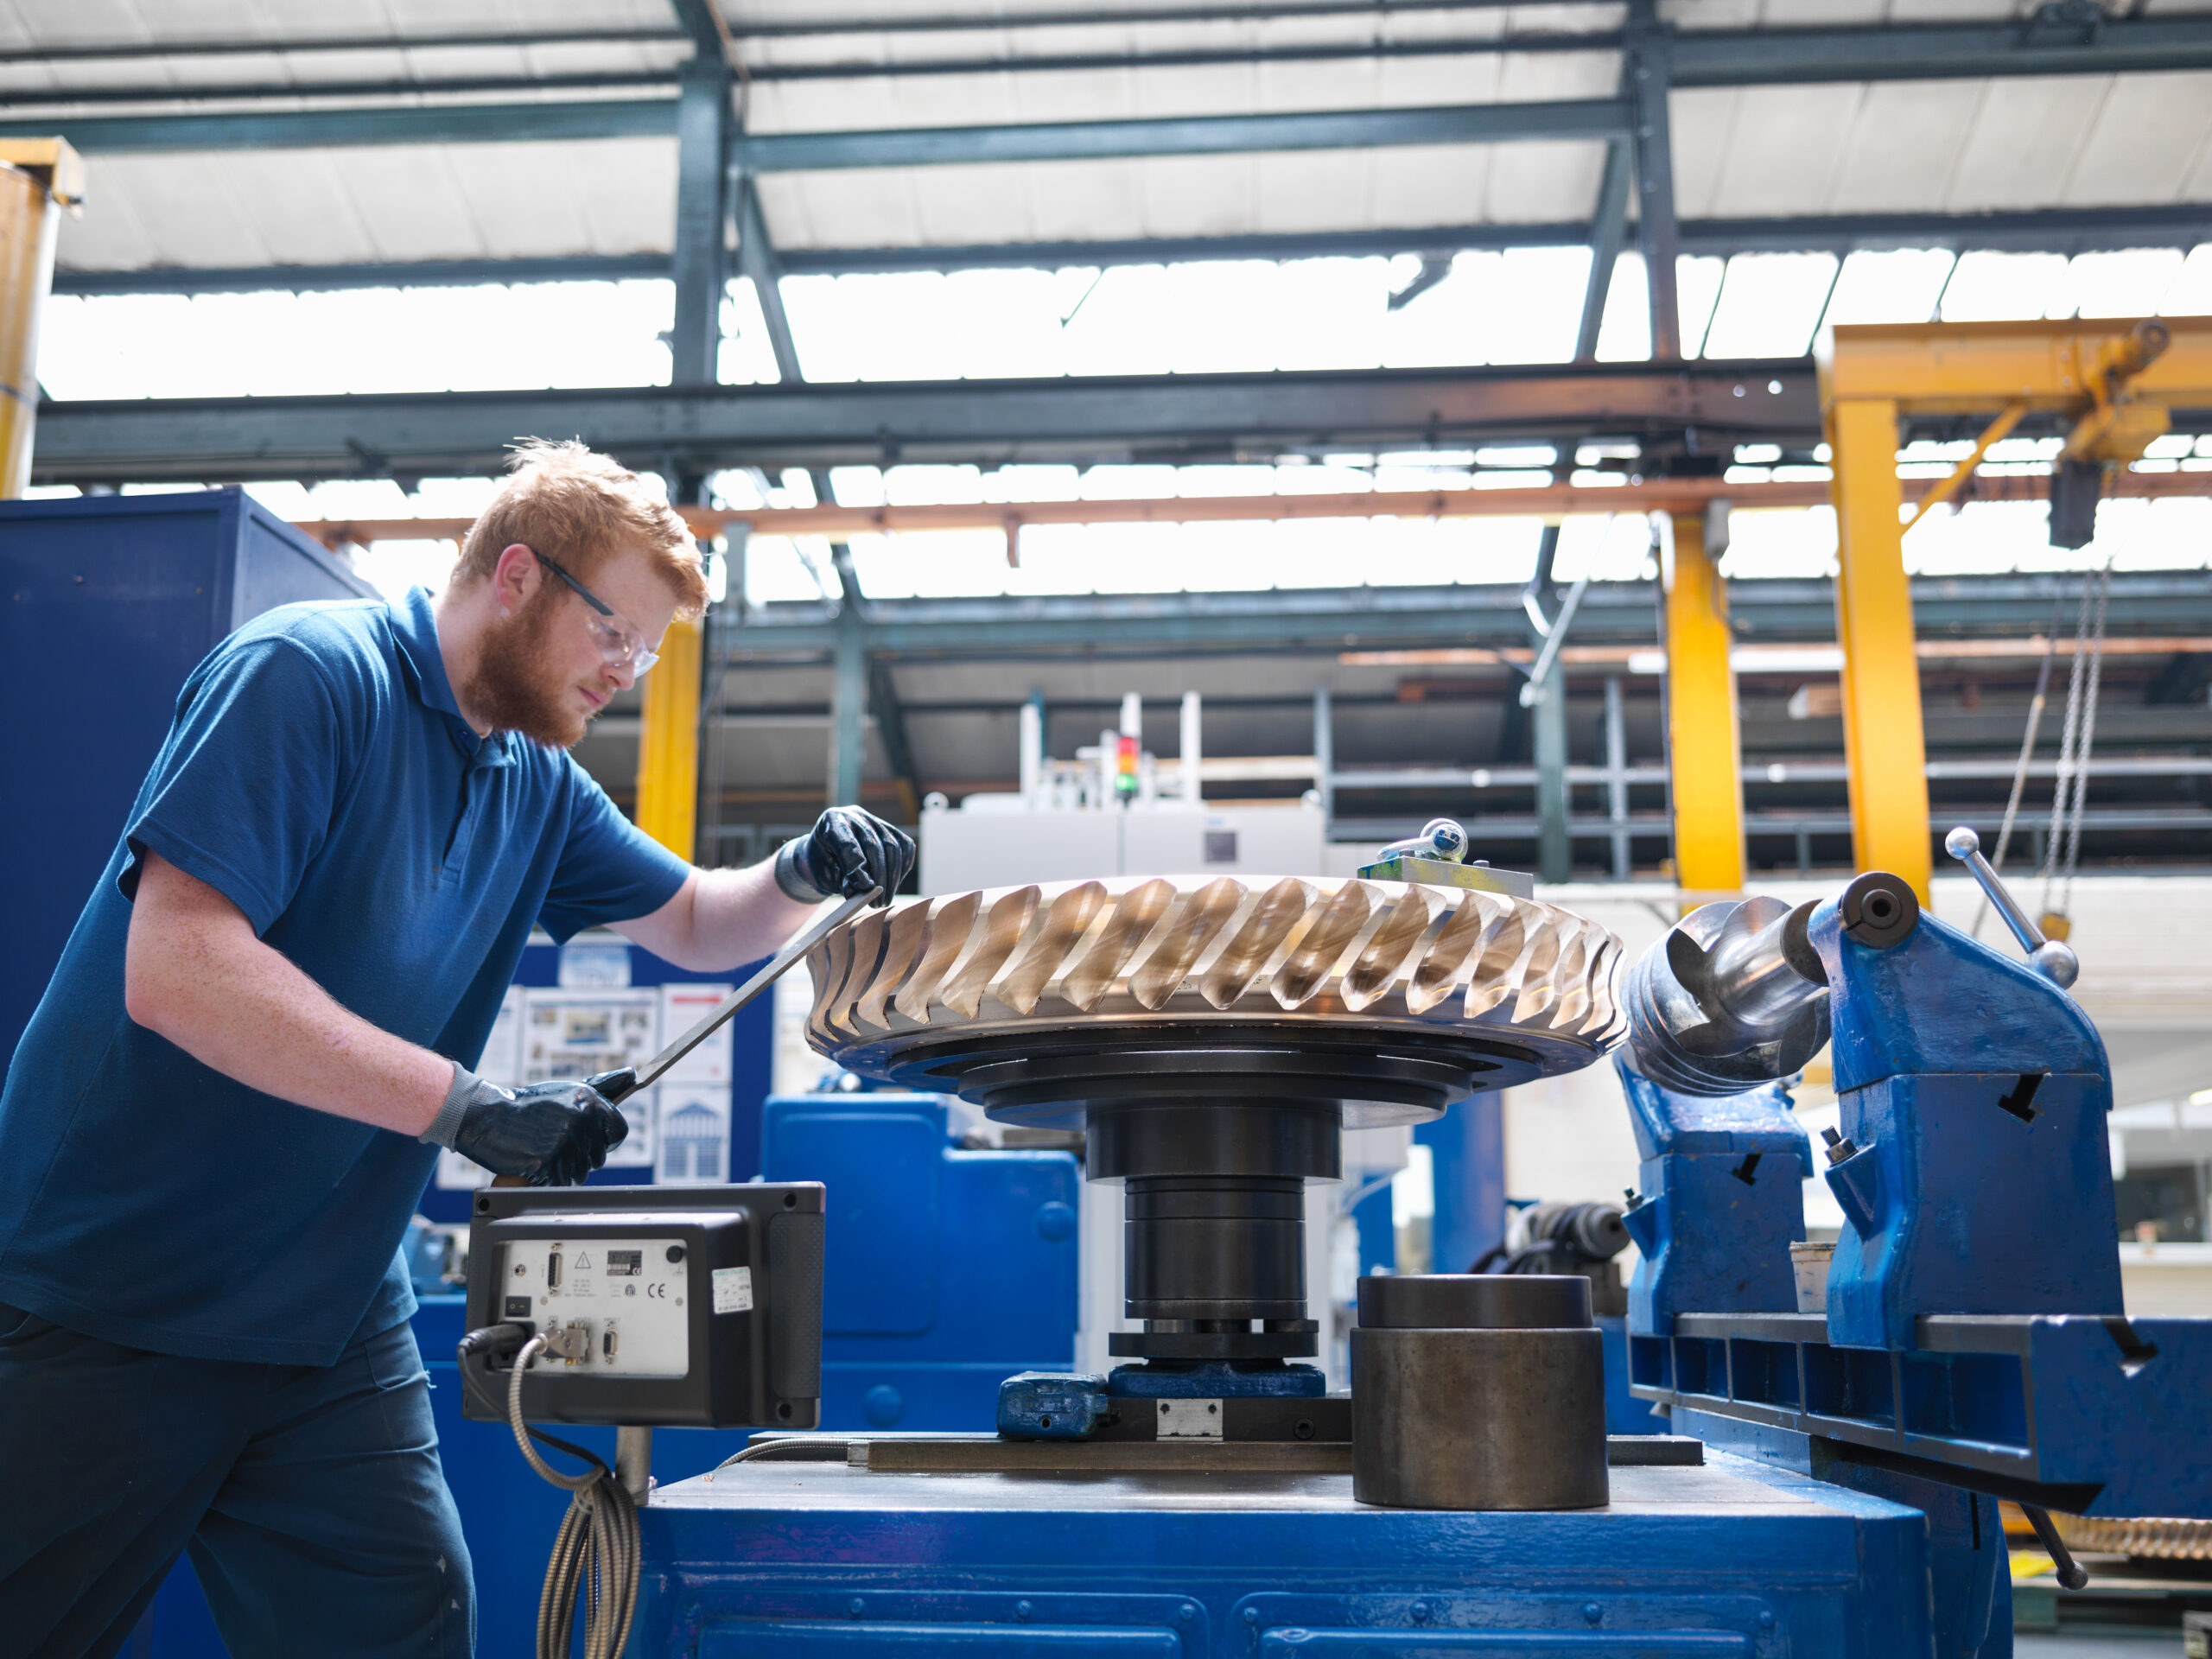 Skilled technician operating precision machinery for gear manufacturing, part of Martin Control's engineering and technical services.